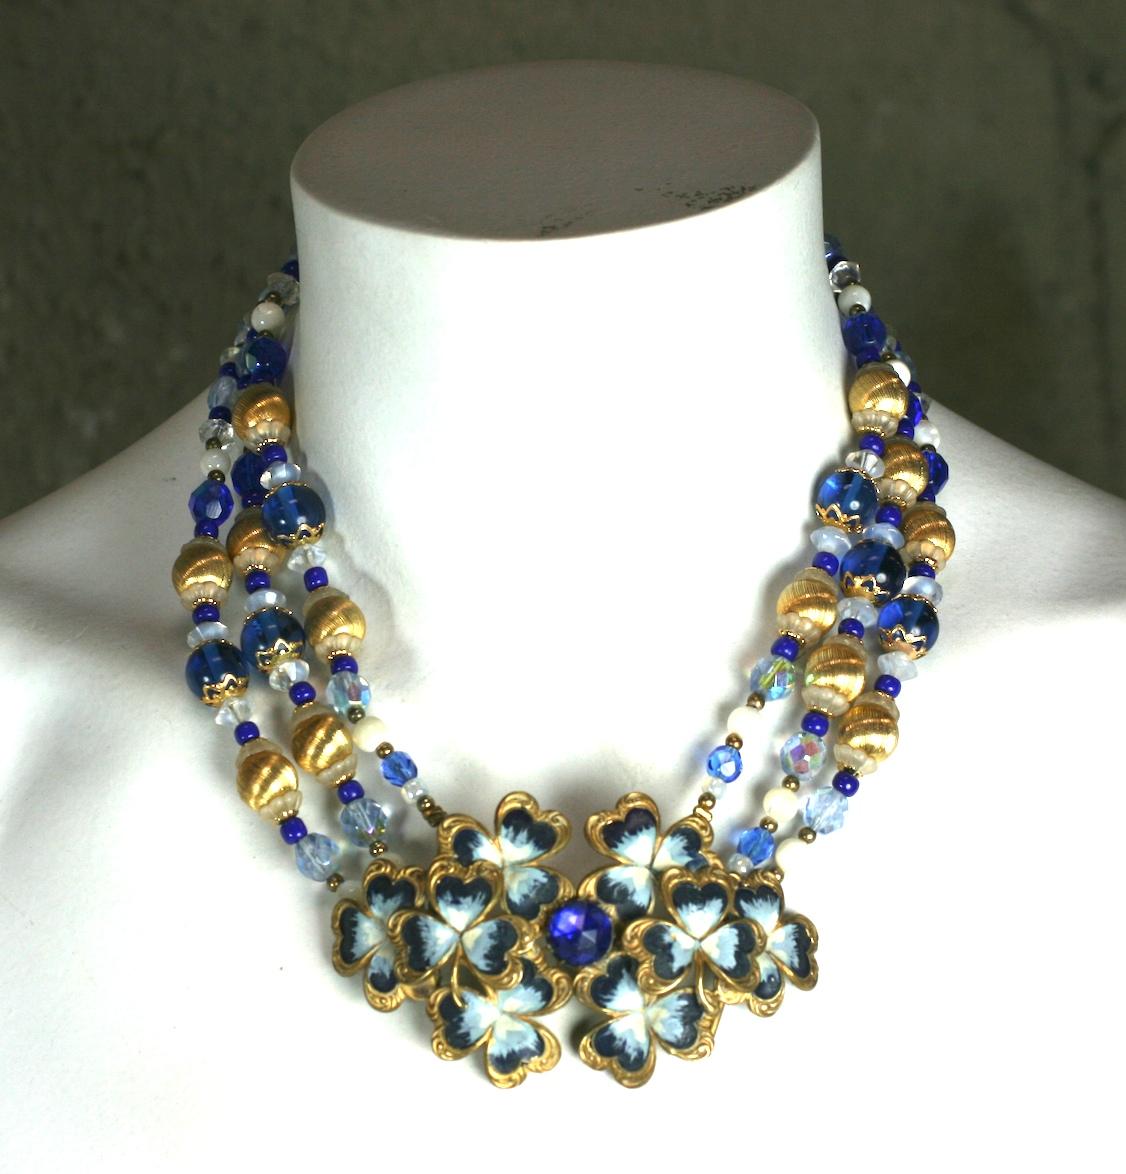 Attractive Beaded Necklace with Victorian Enamel Buckle In Excellent Condition For Sale In New York, NY